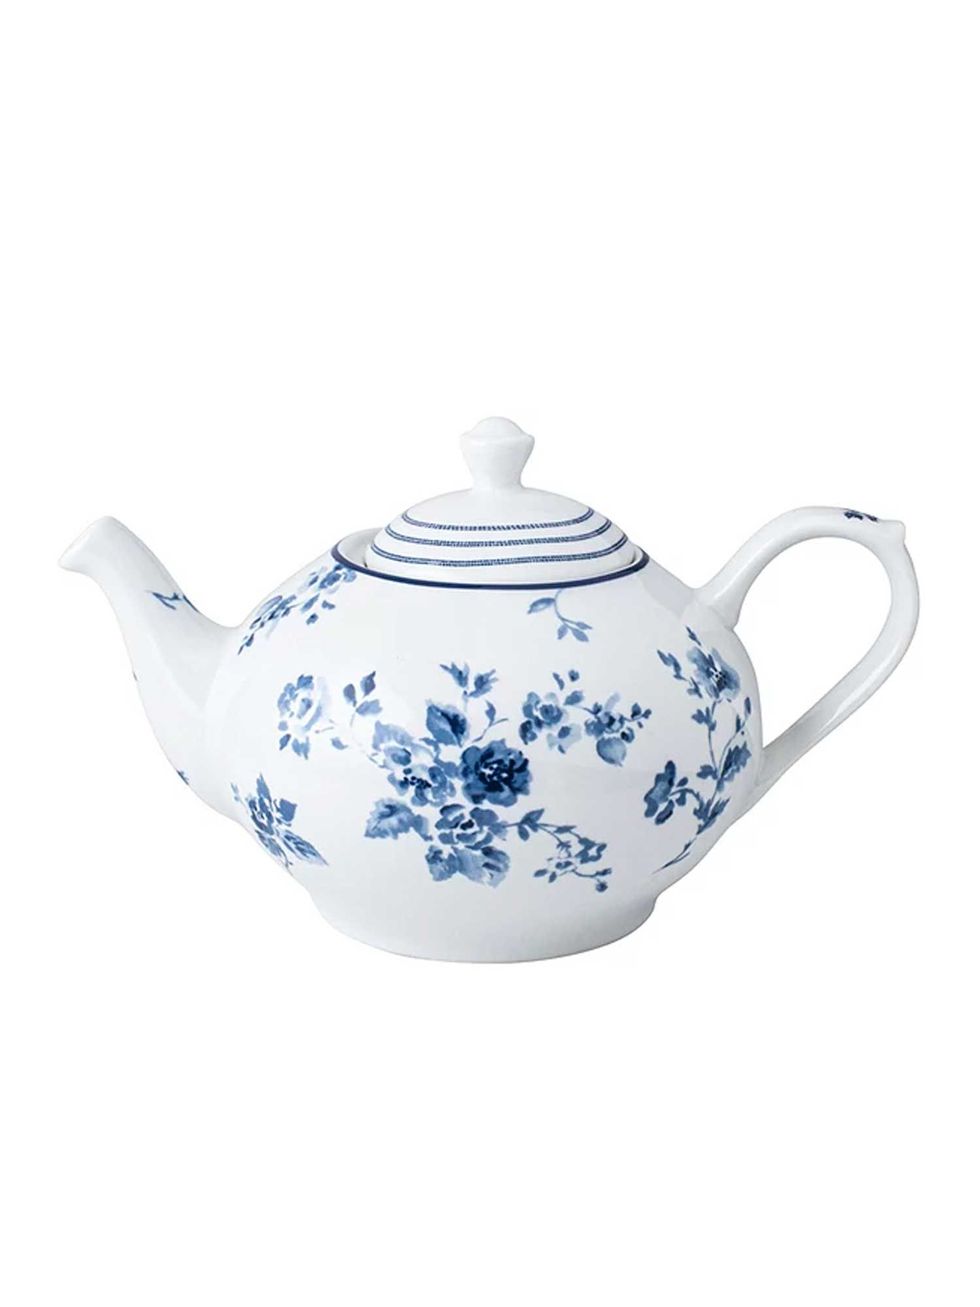 The best floral teapots to buy this year